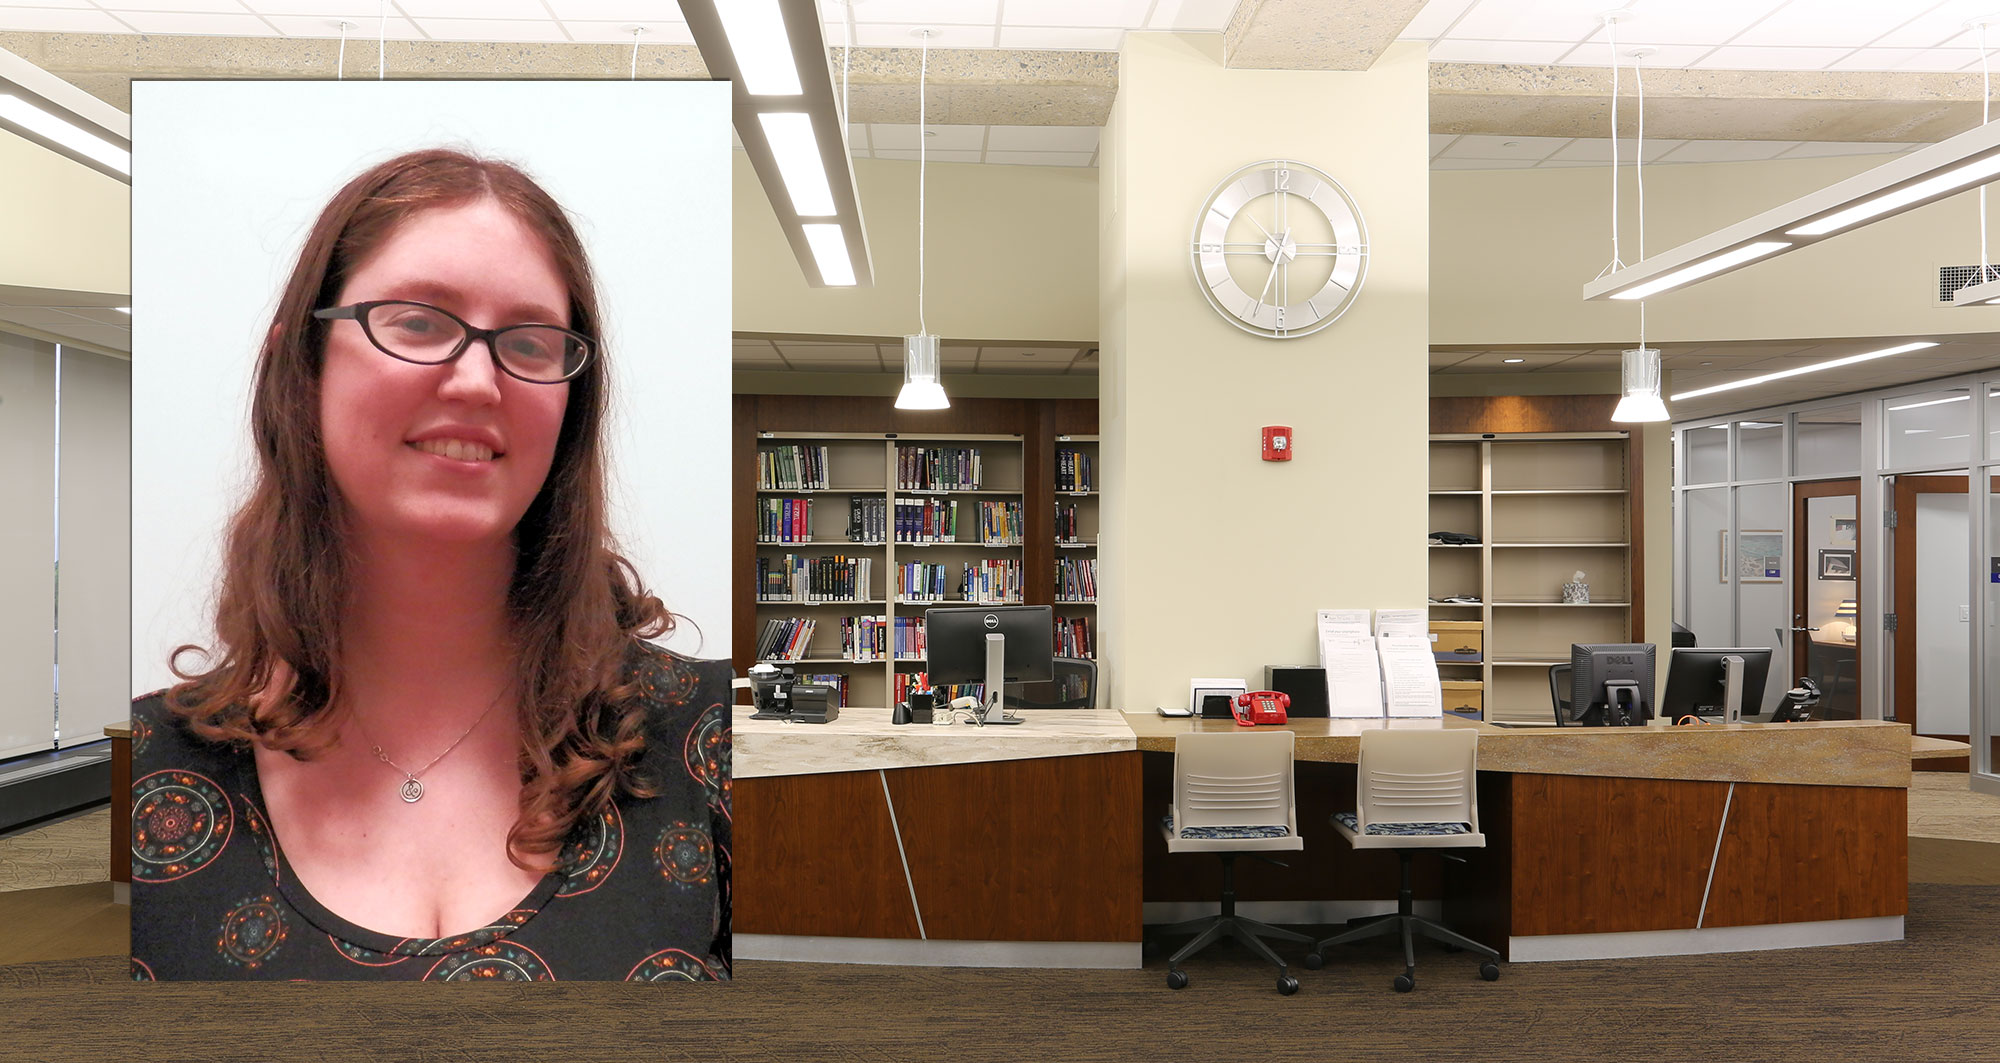 A head-and-shoulders photo of Alex Harrington is superimposed on a photo depicting the library's main circulation and reference desk.